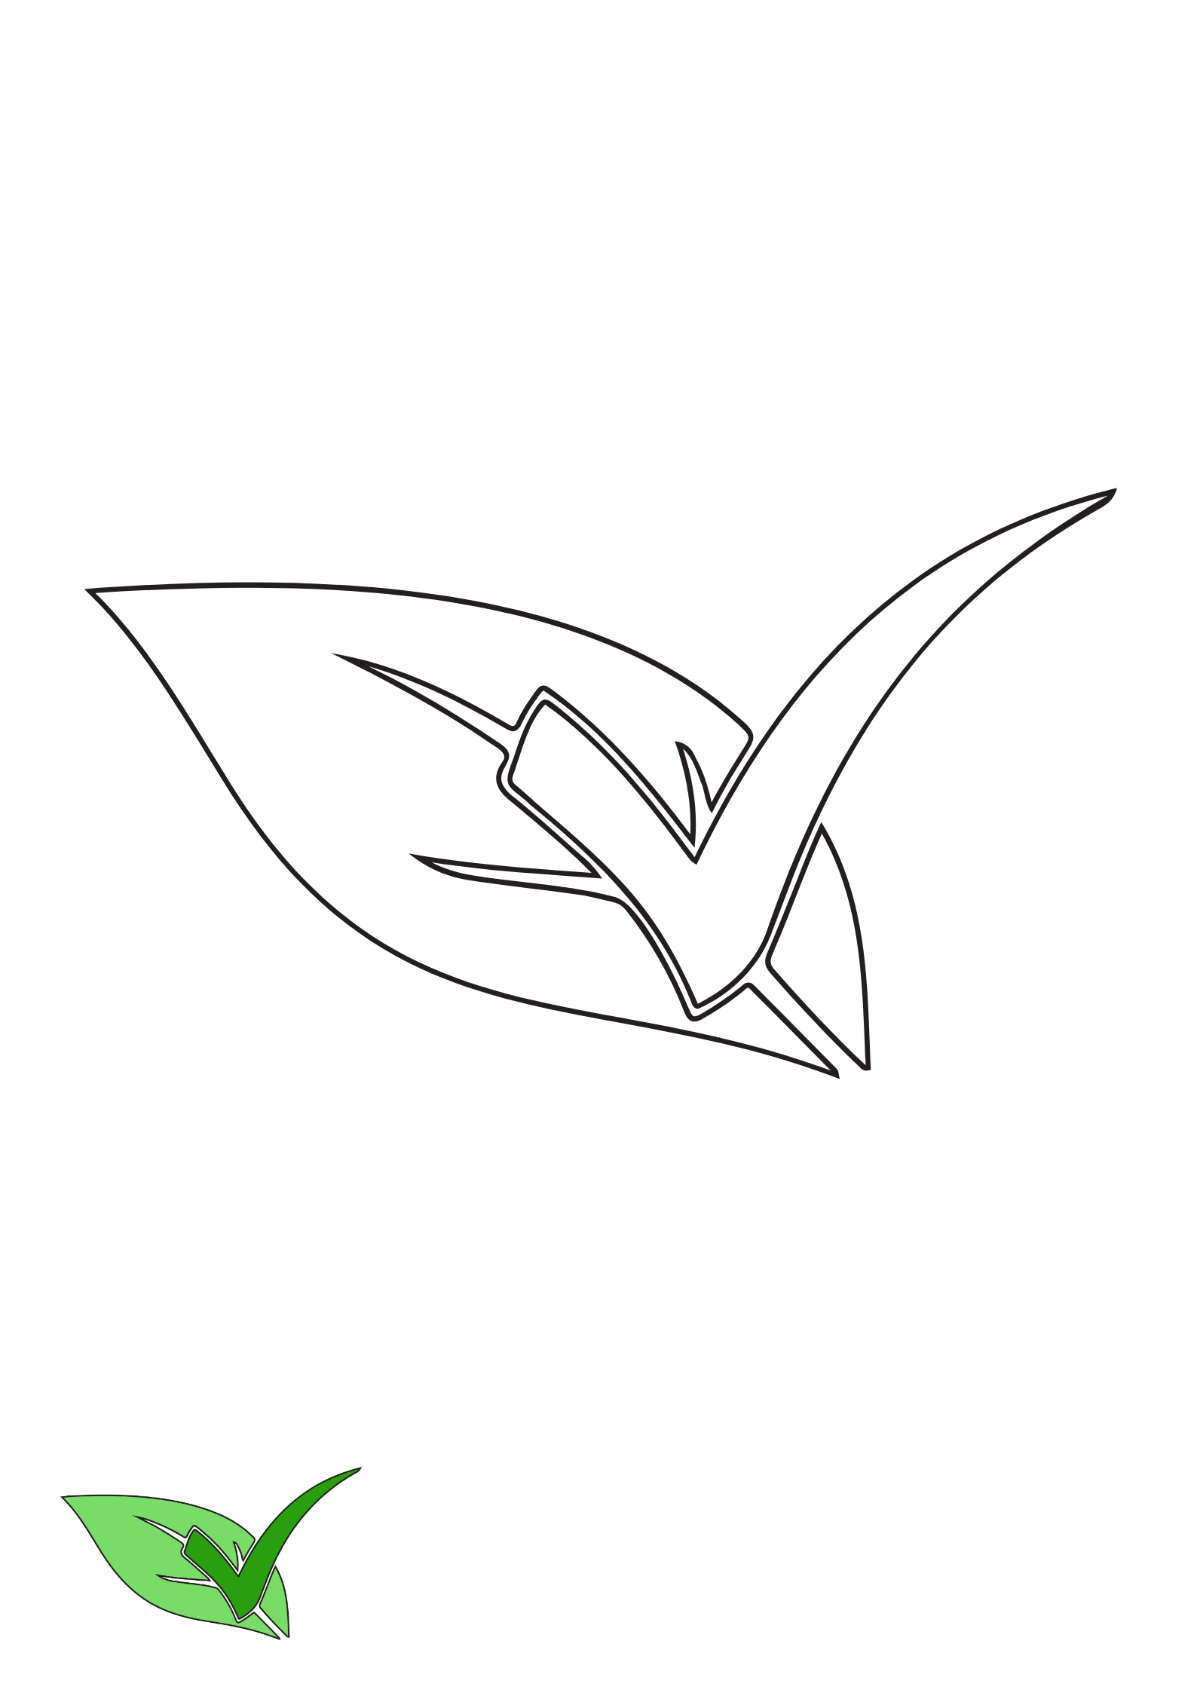 Leaf Tick Mark coloring page Template